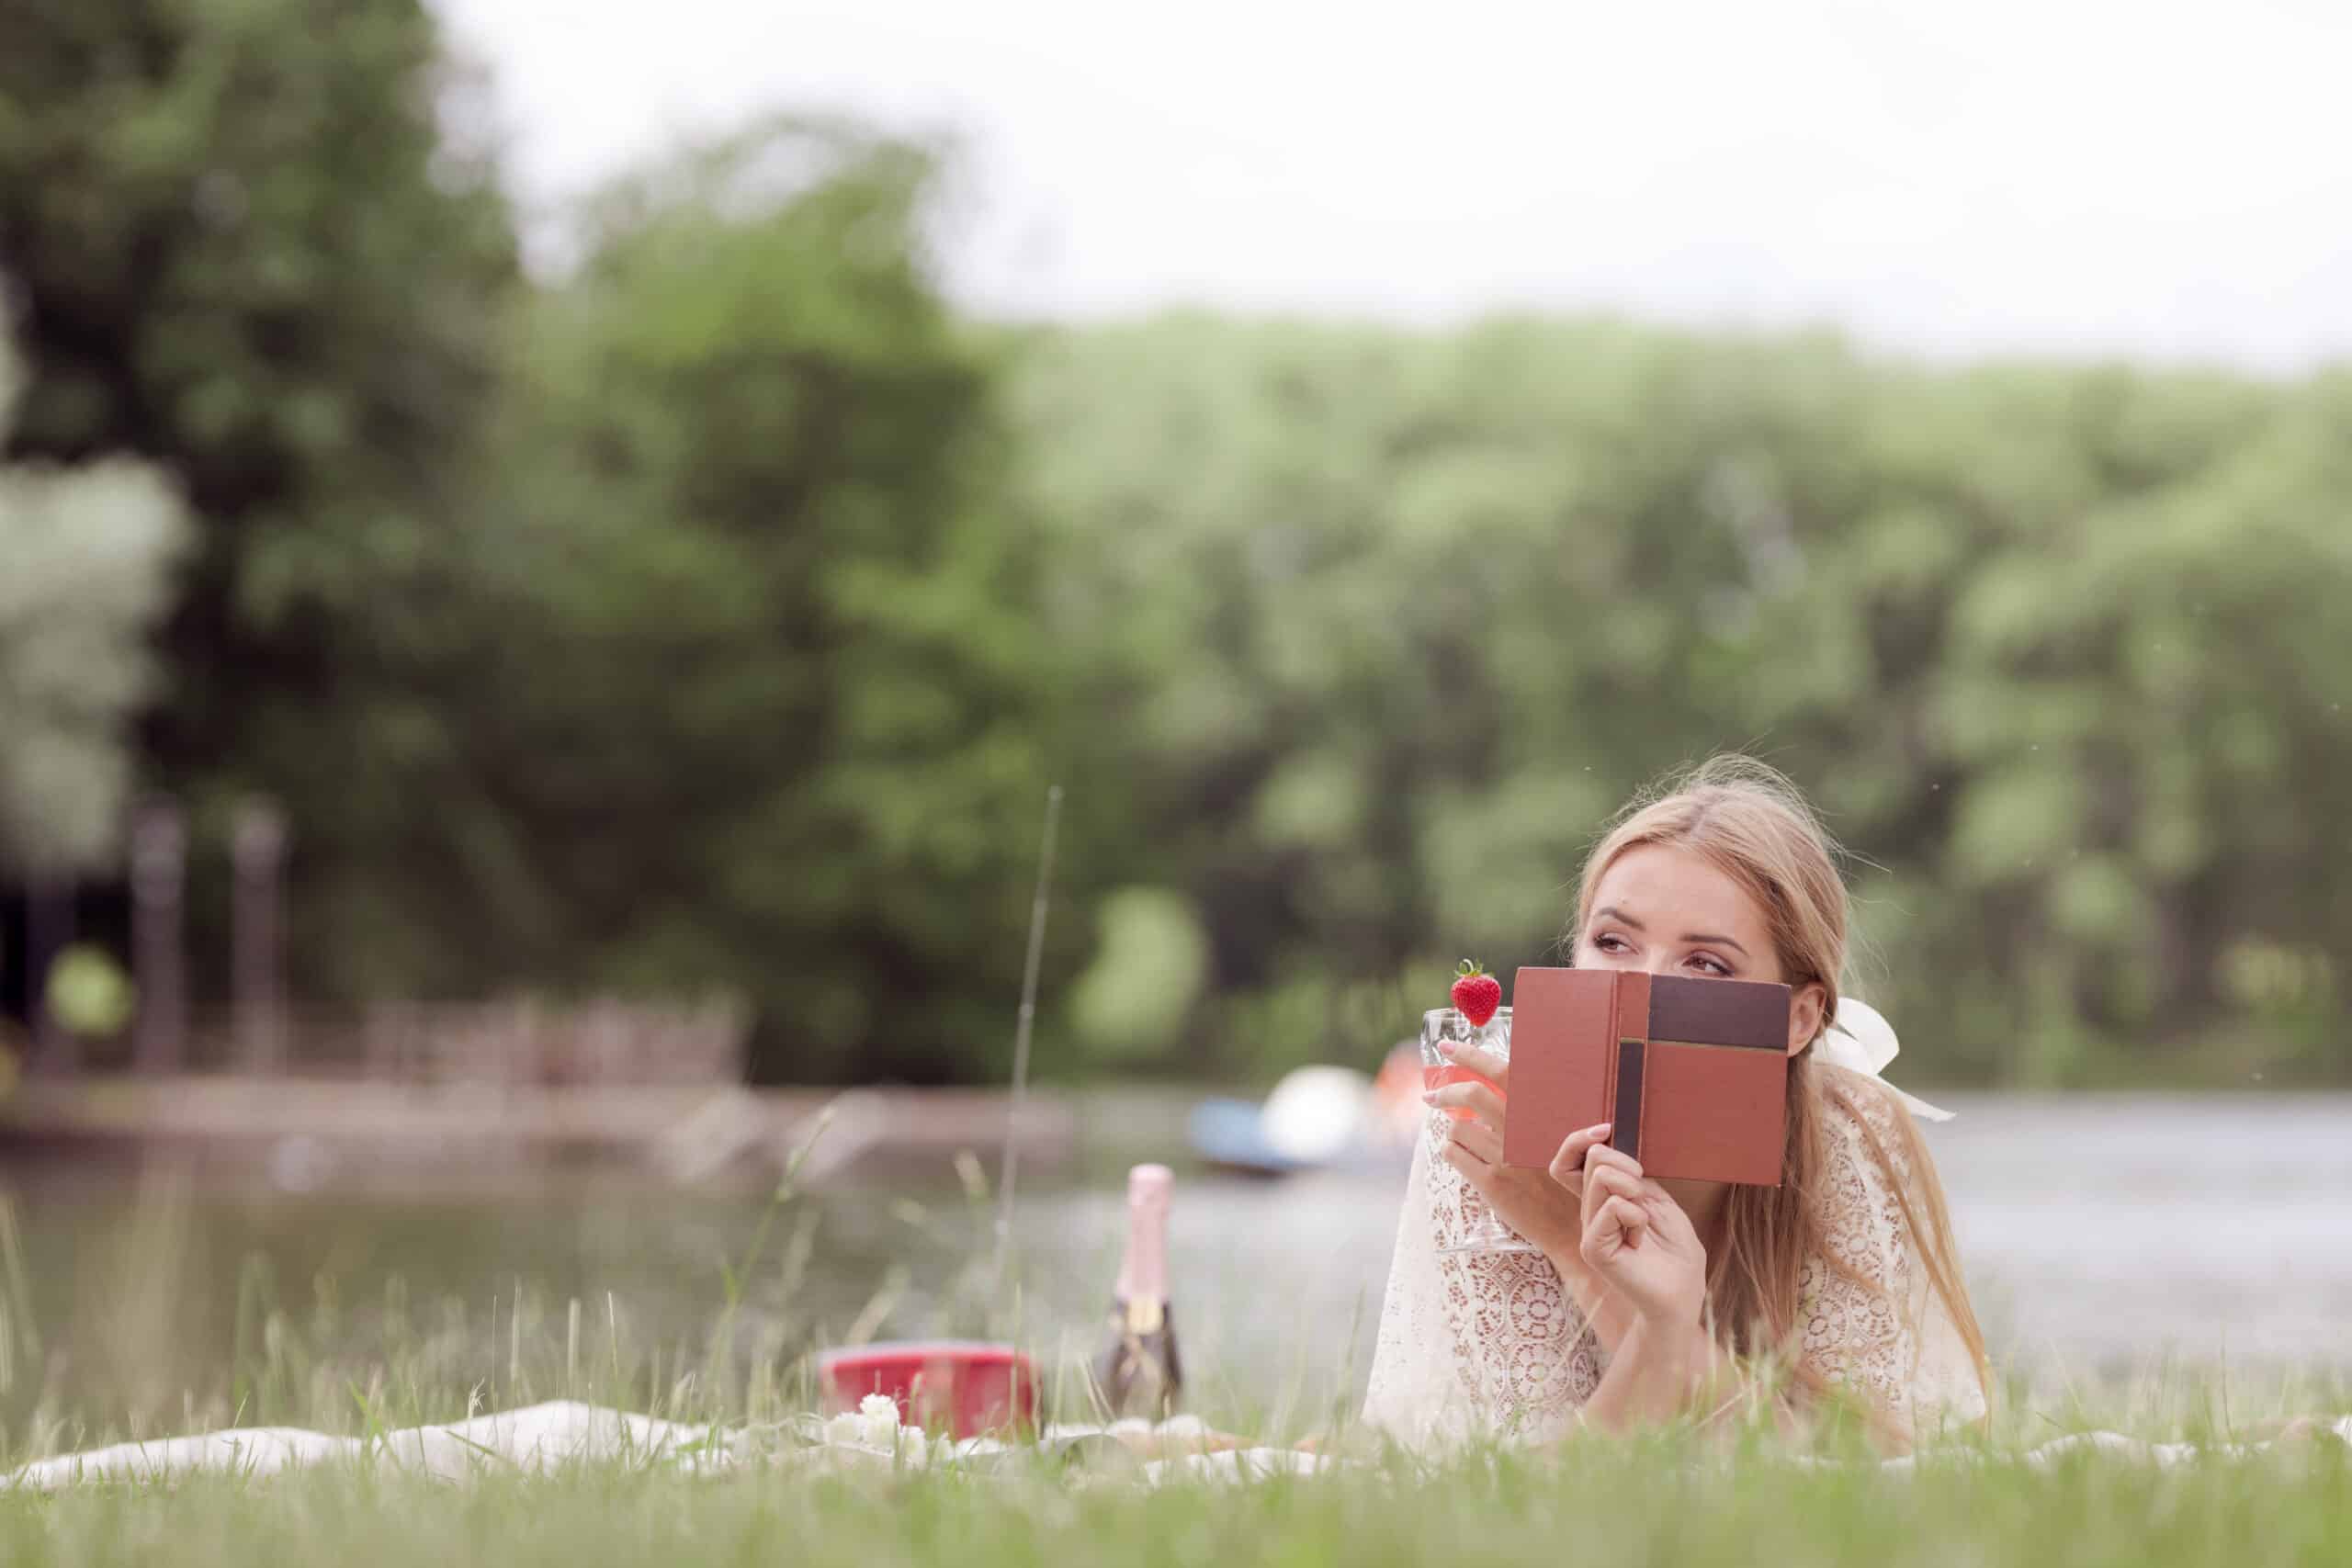 A young lady in a white dress reads a book on the grass.